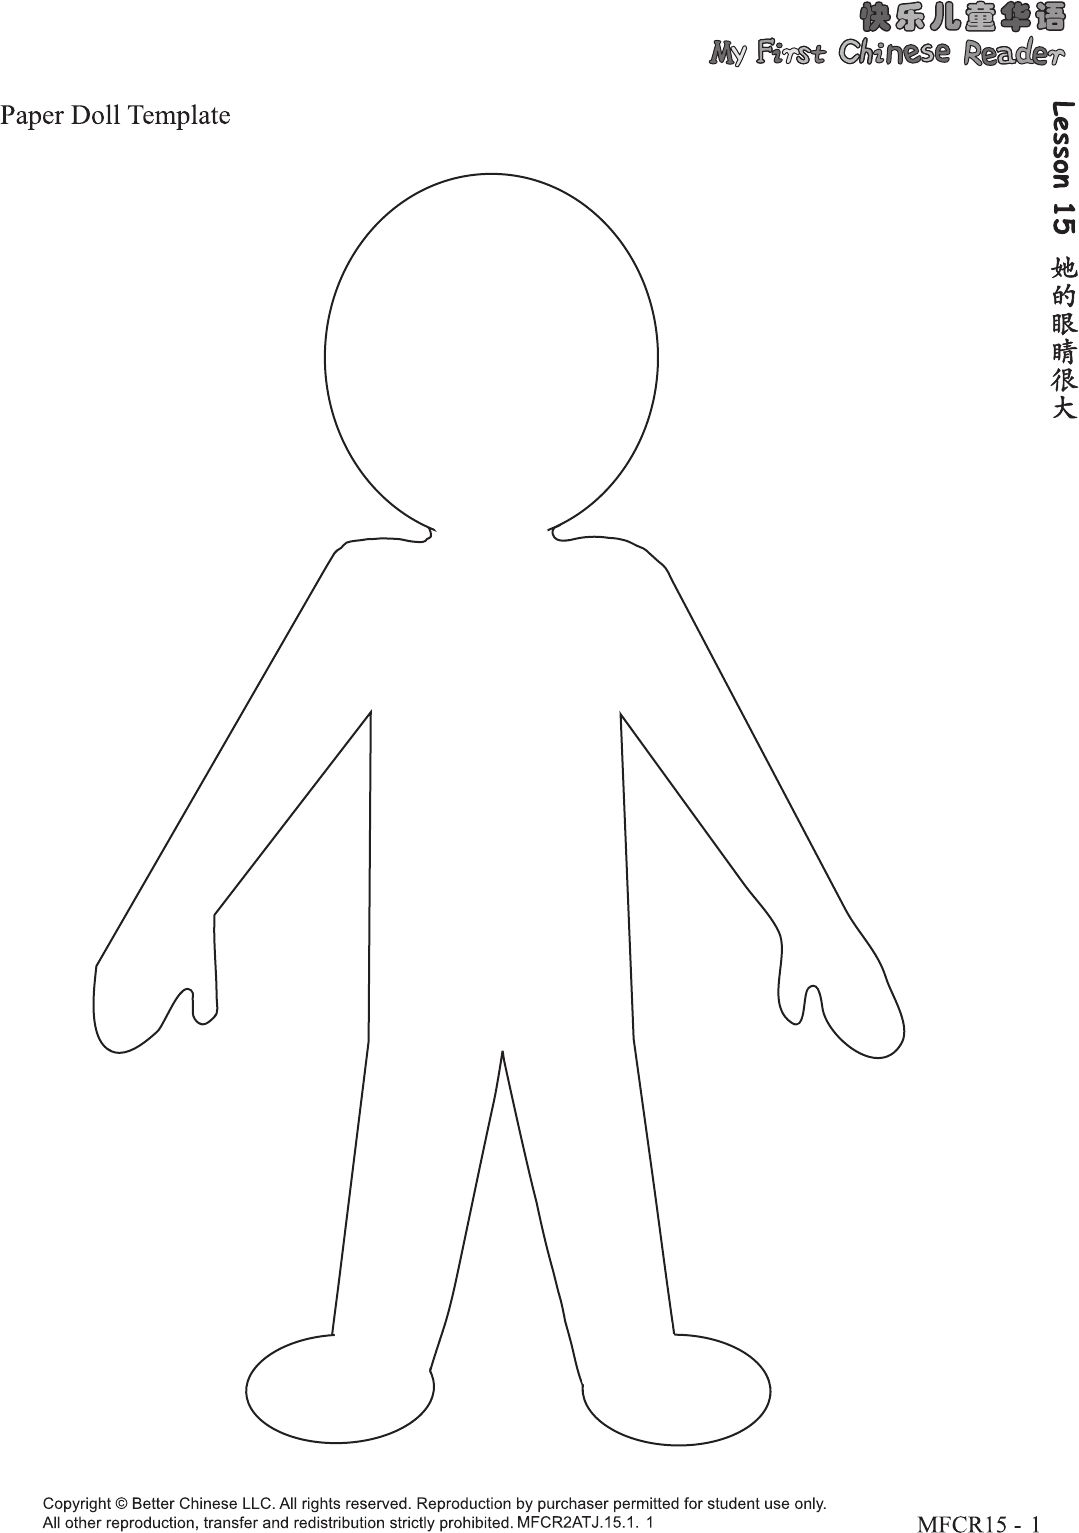 Free Paper Doll Template PDF 575KB 1 Page(s)